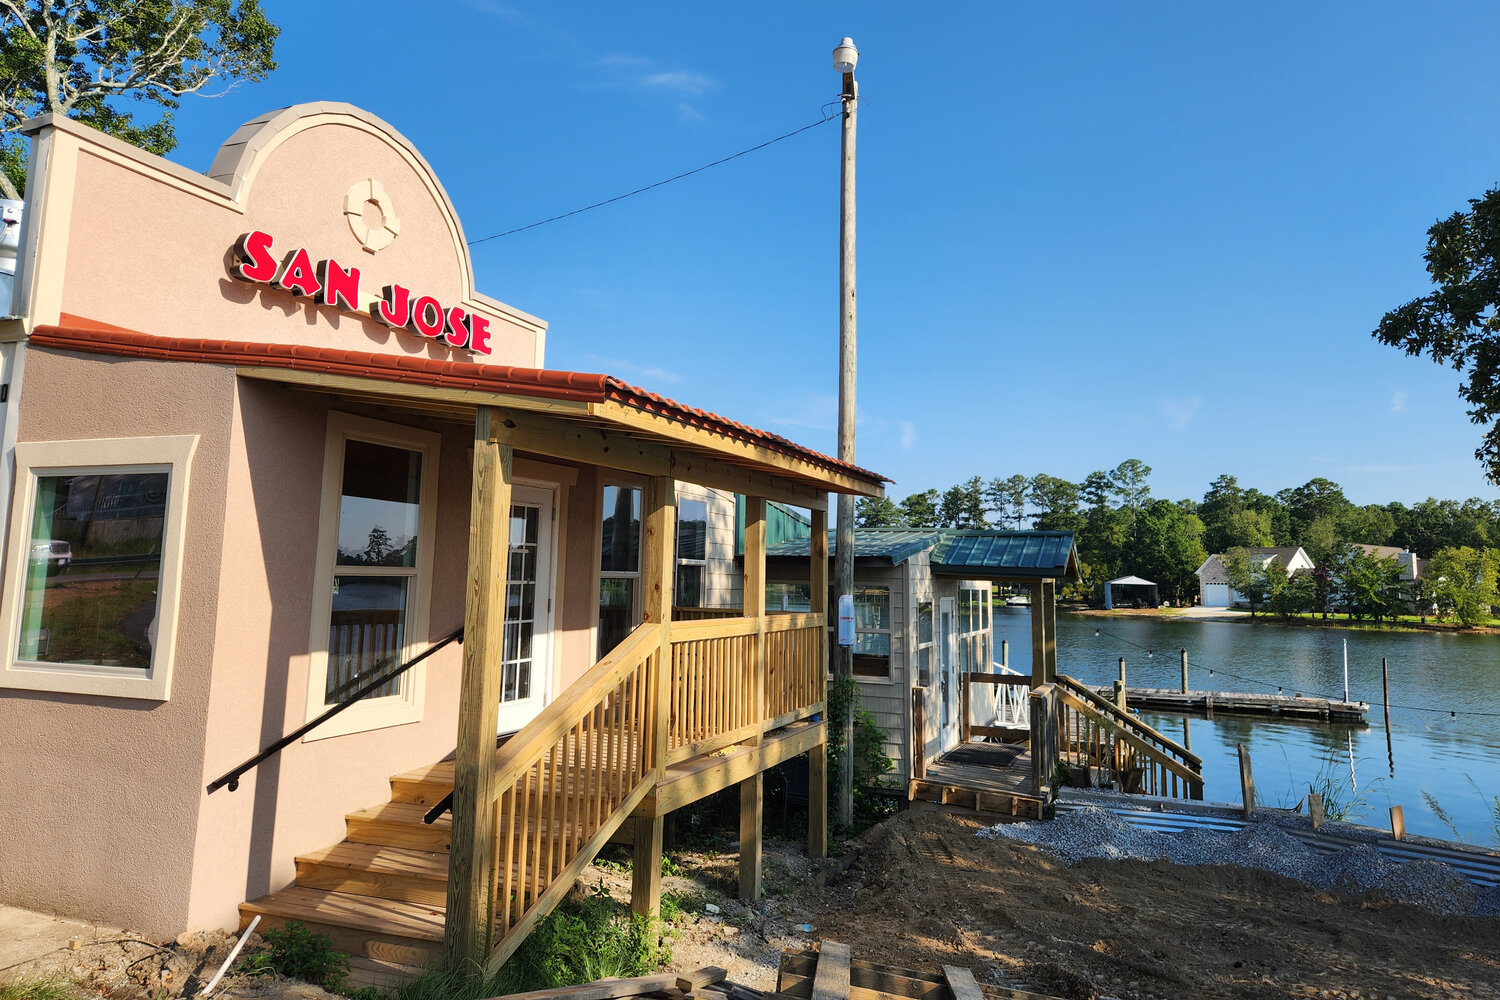 San Jose’s forthcoming lakeside location in Leesville